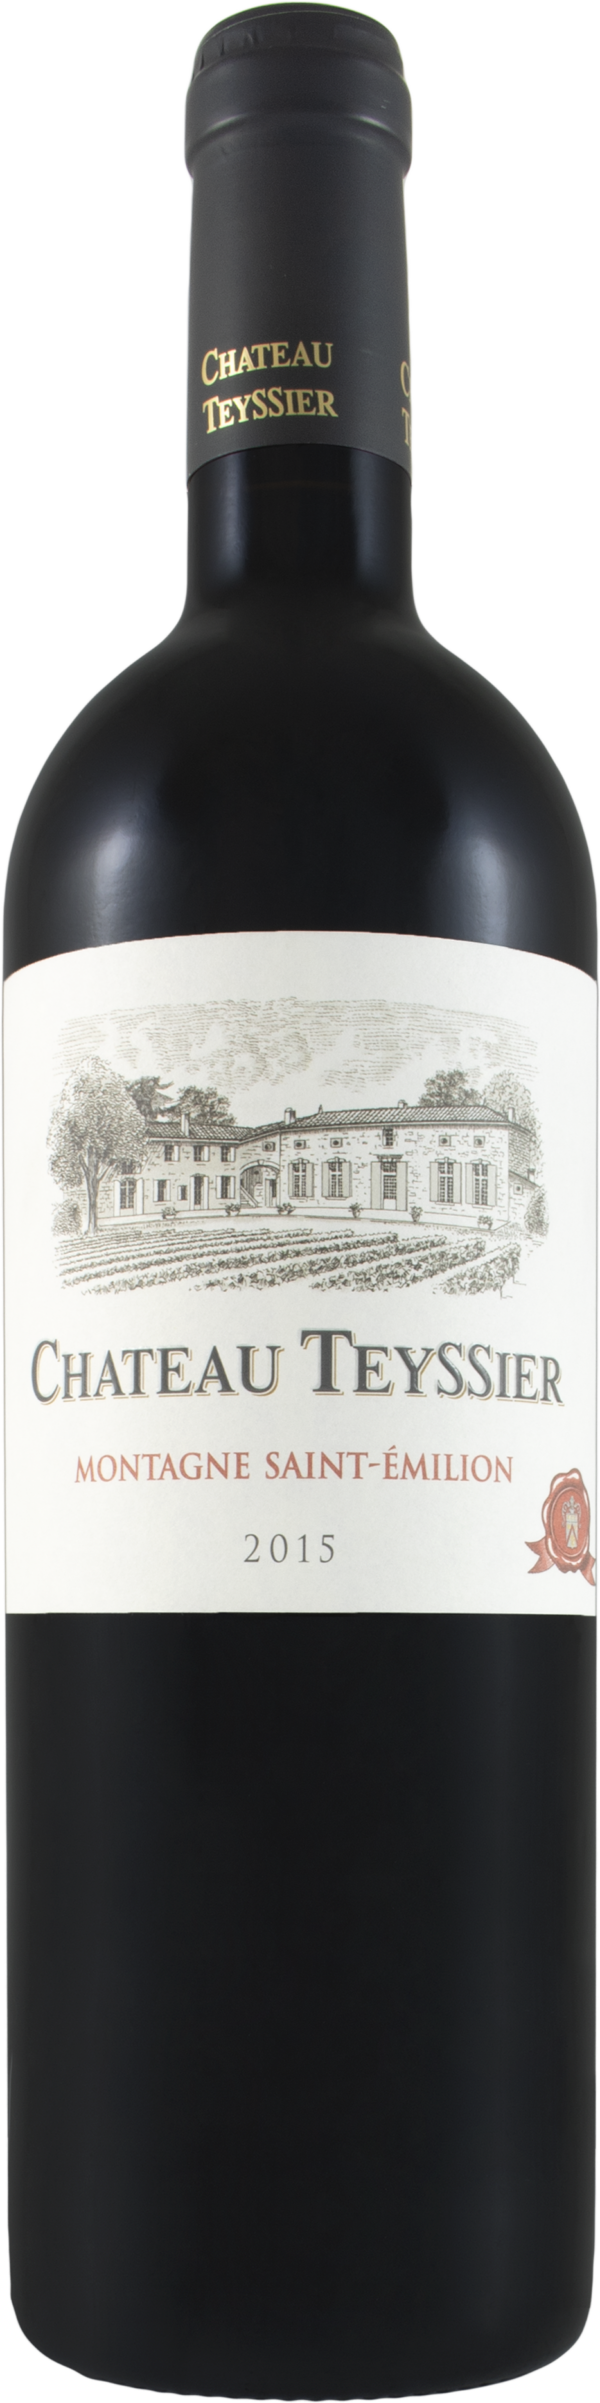 Product image of Chateau Teyssier 2019 from 8wines